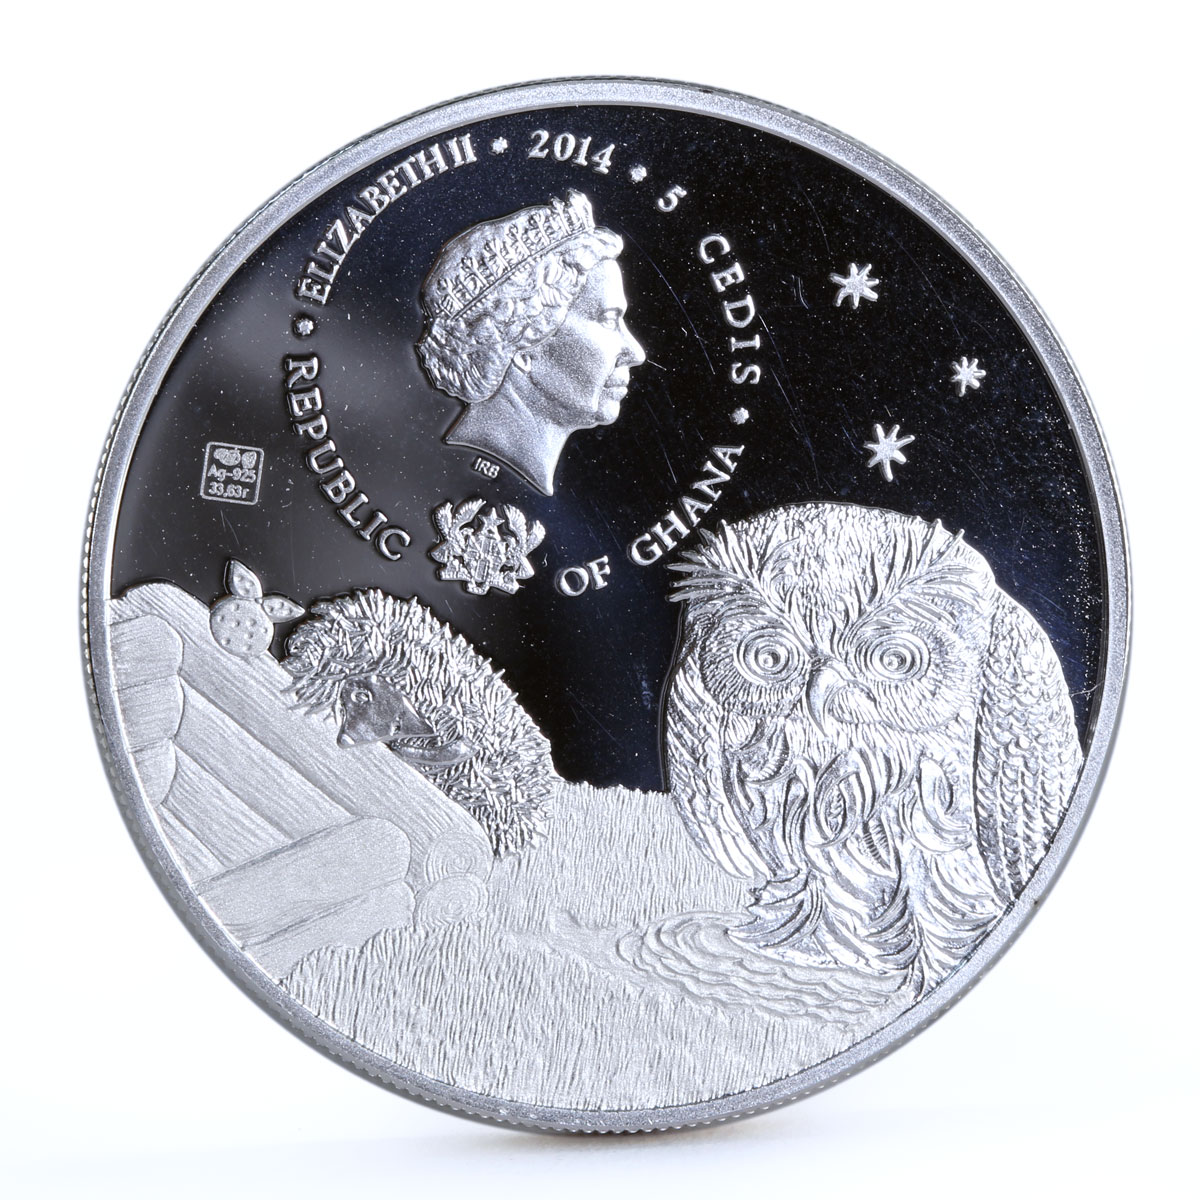 Ghana 5 cedis The Hedgehog and The Owl colored silver coin 2014